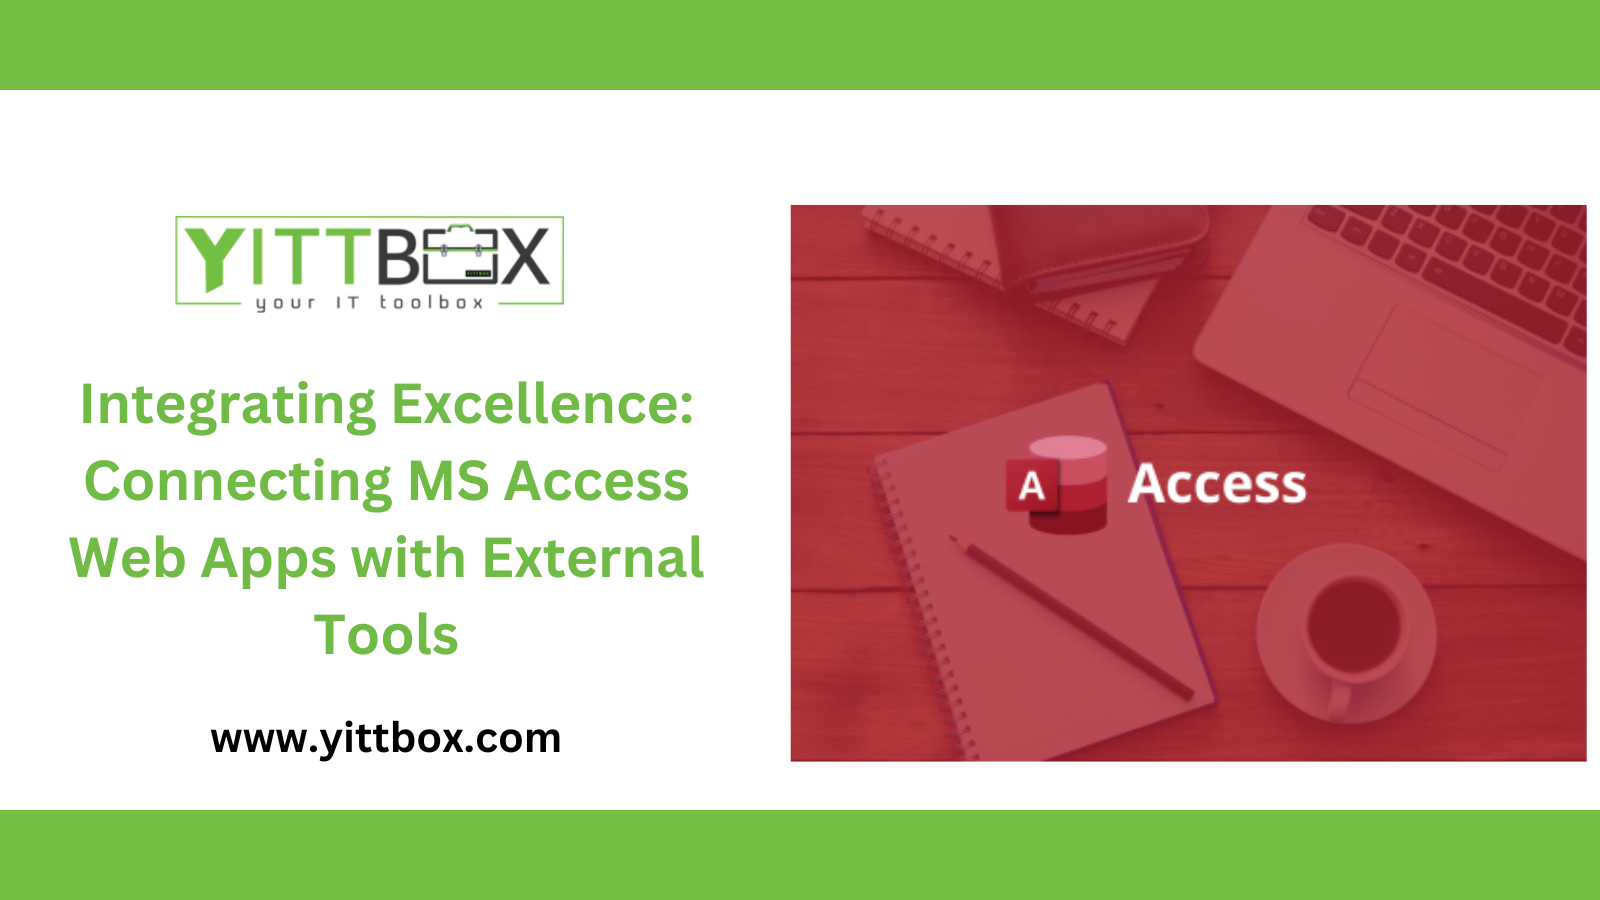 Integrating Excellence: Connecting MS Access Web Apps with External Tools